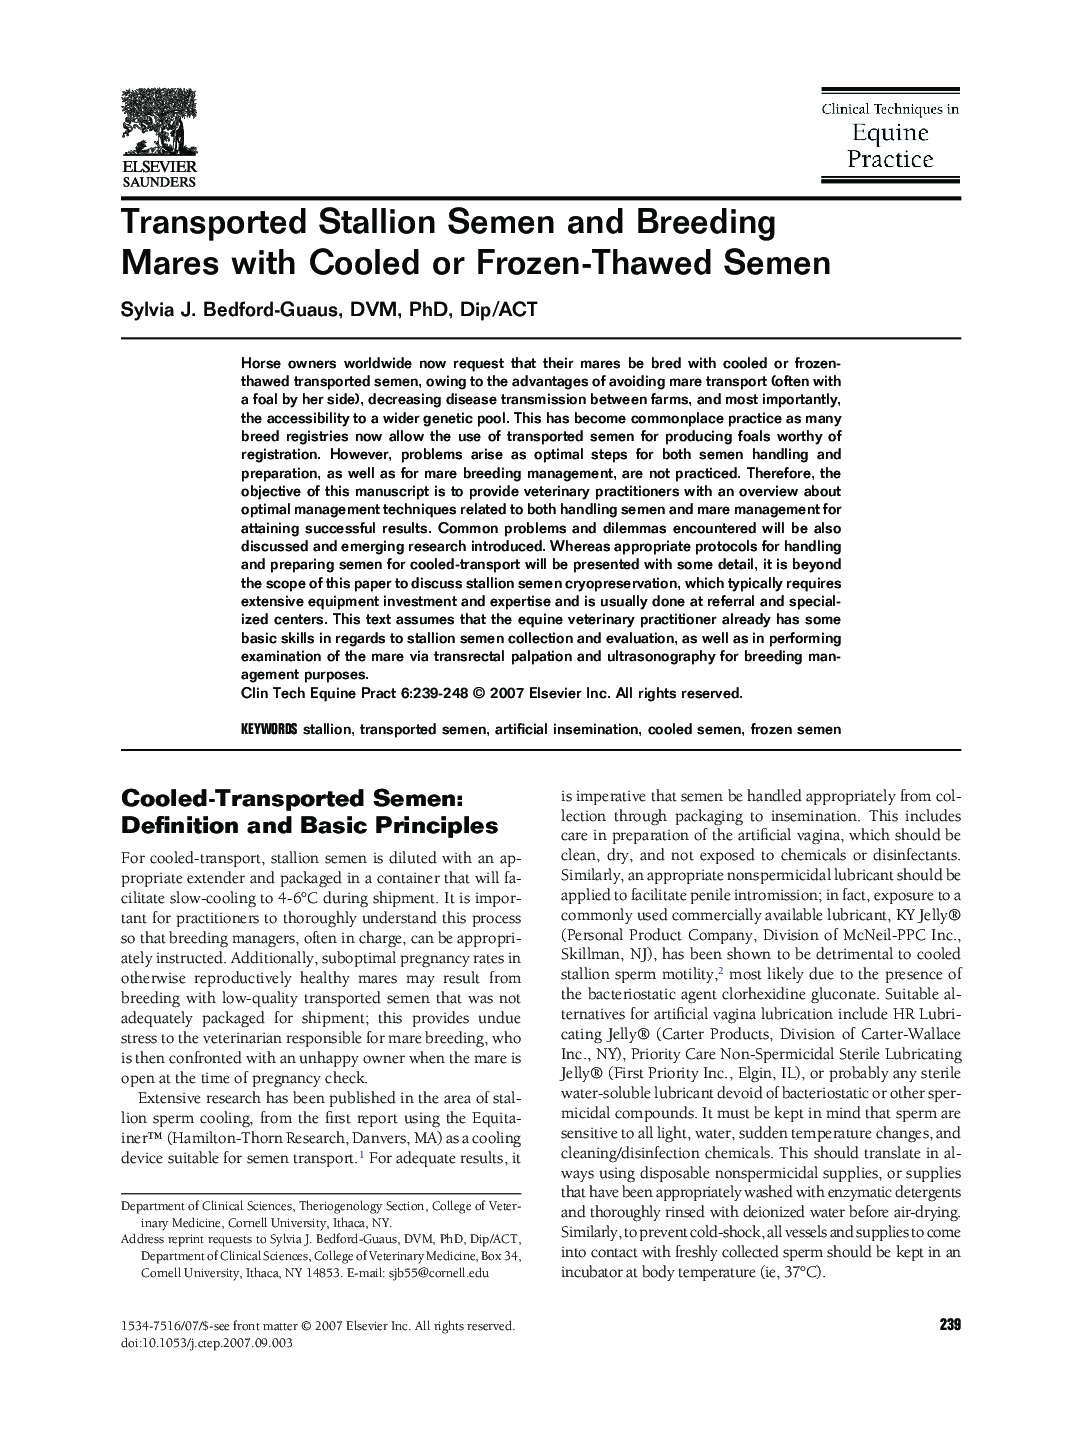 Transported Stallion Semen and Breeding Mares with Cooled or Frozen-Thawed Semen